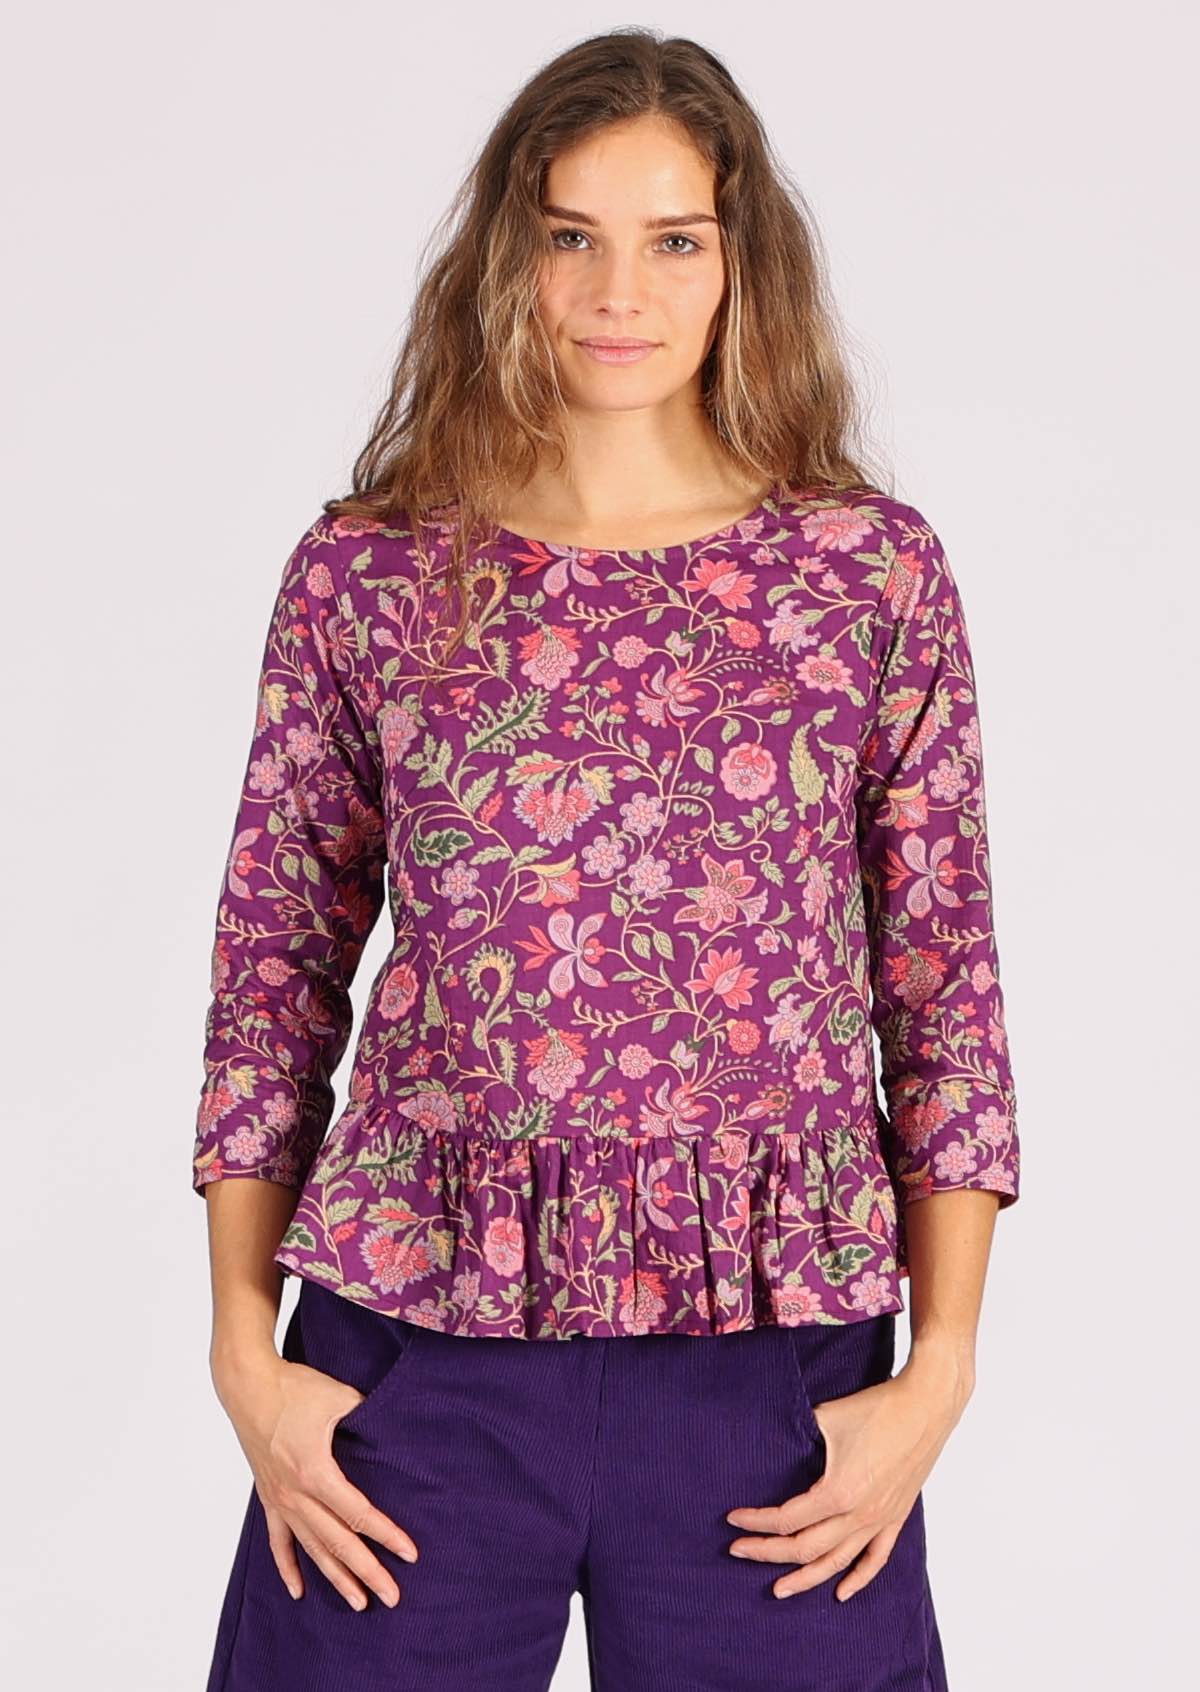 Simple sophistication in this floral print peplum cotton top